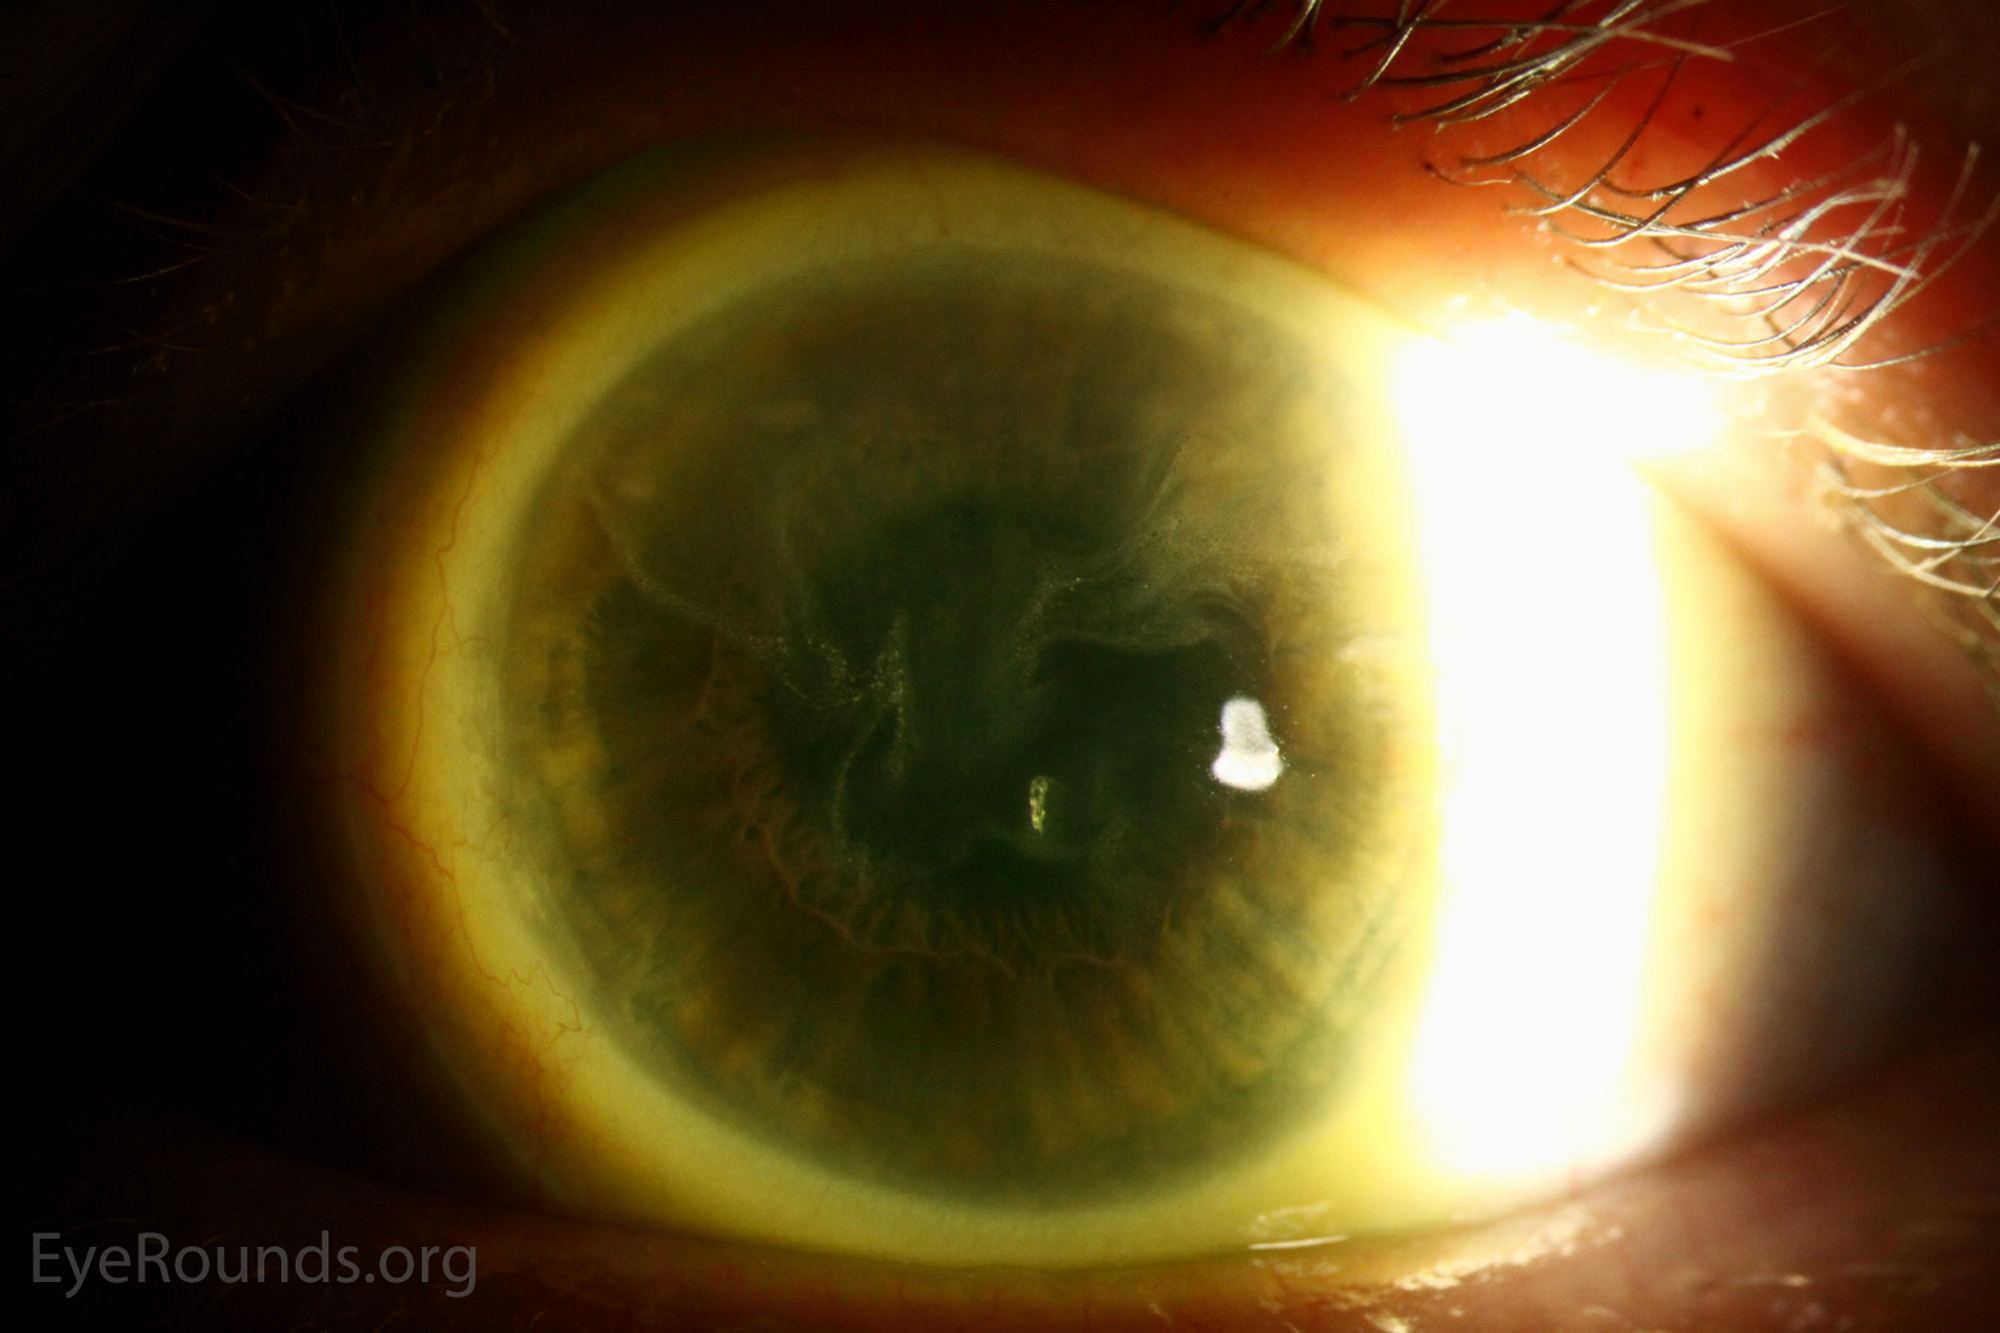 Disruption of the normal physiologic regenerative process and repopulation of corneal epithelium